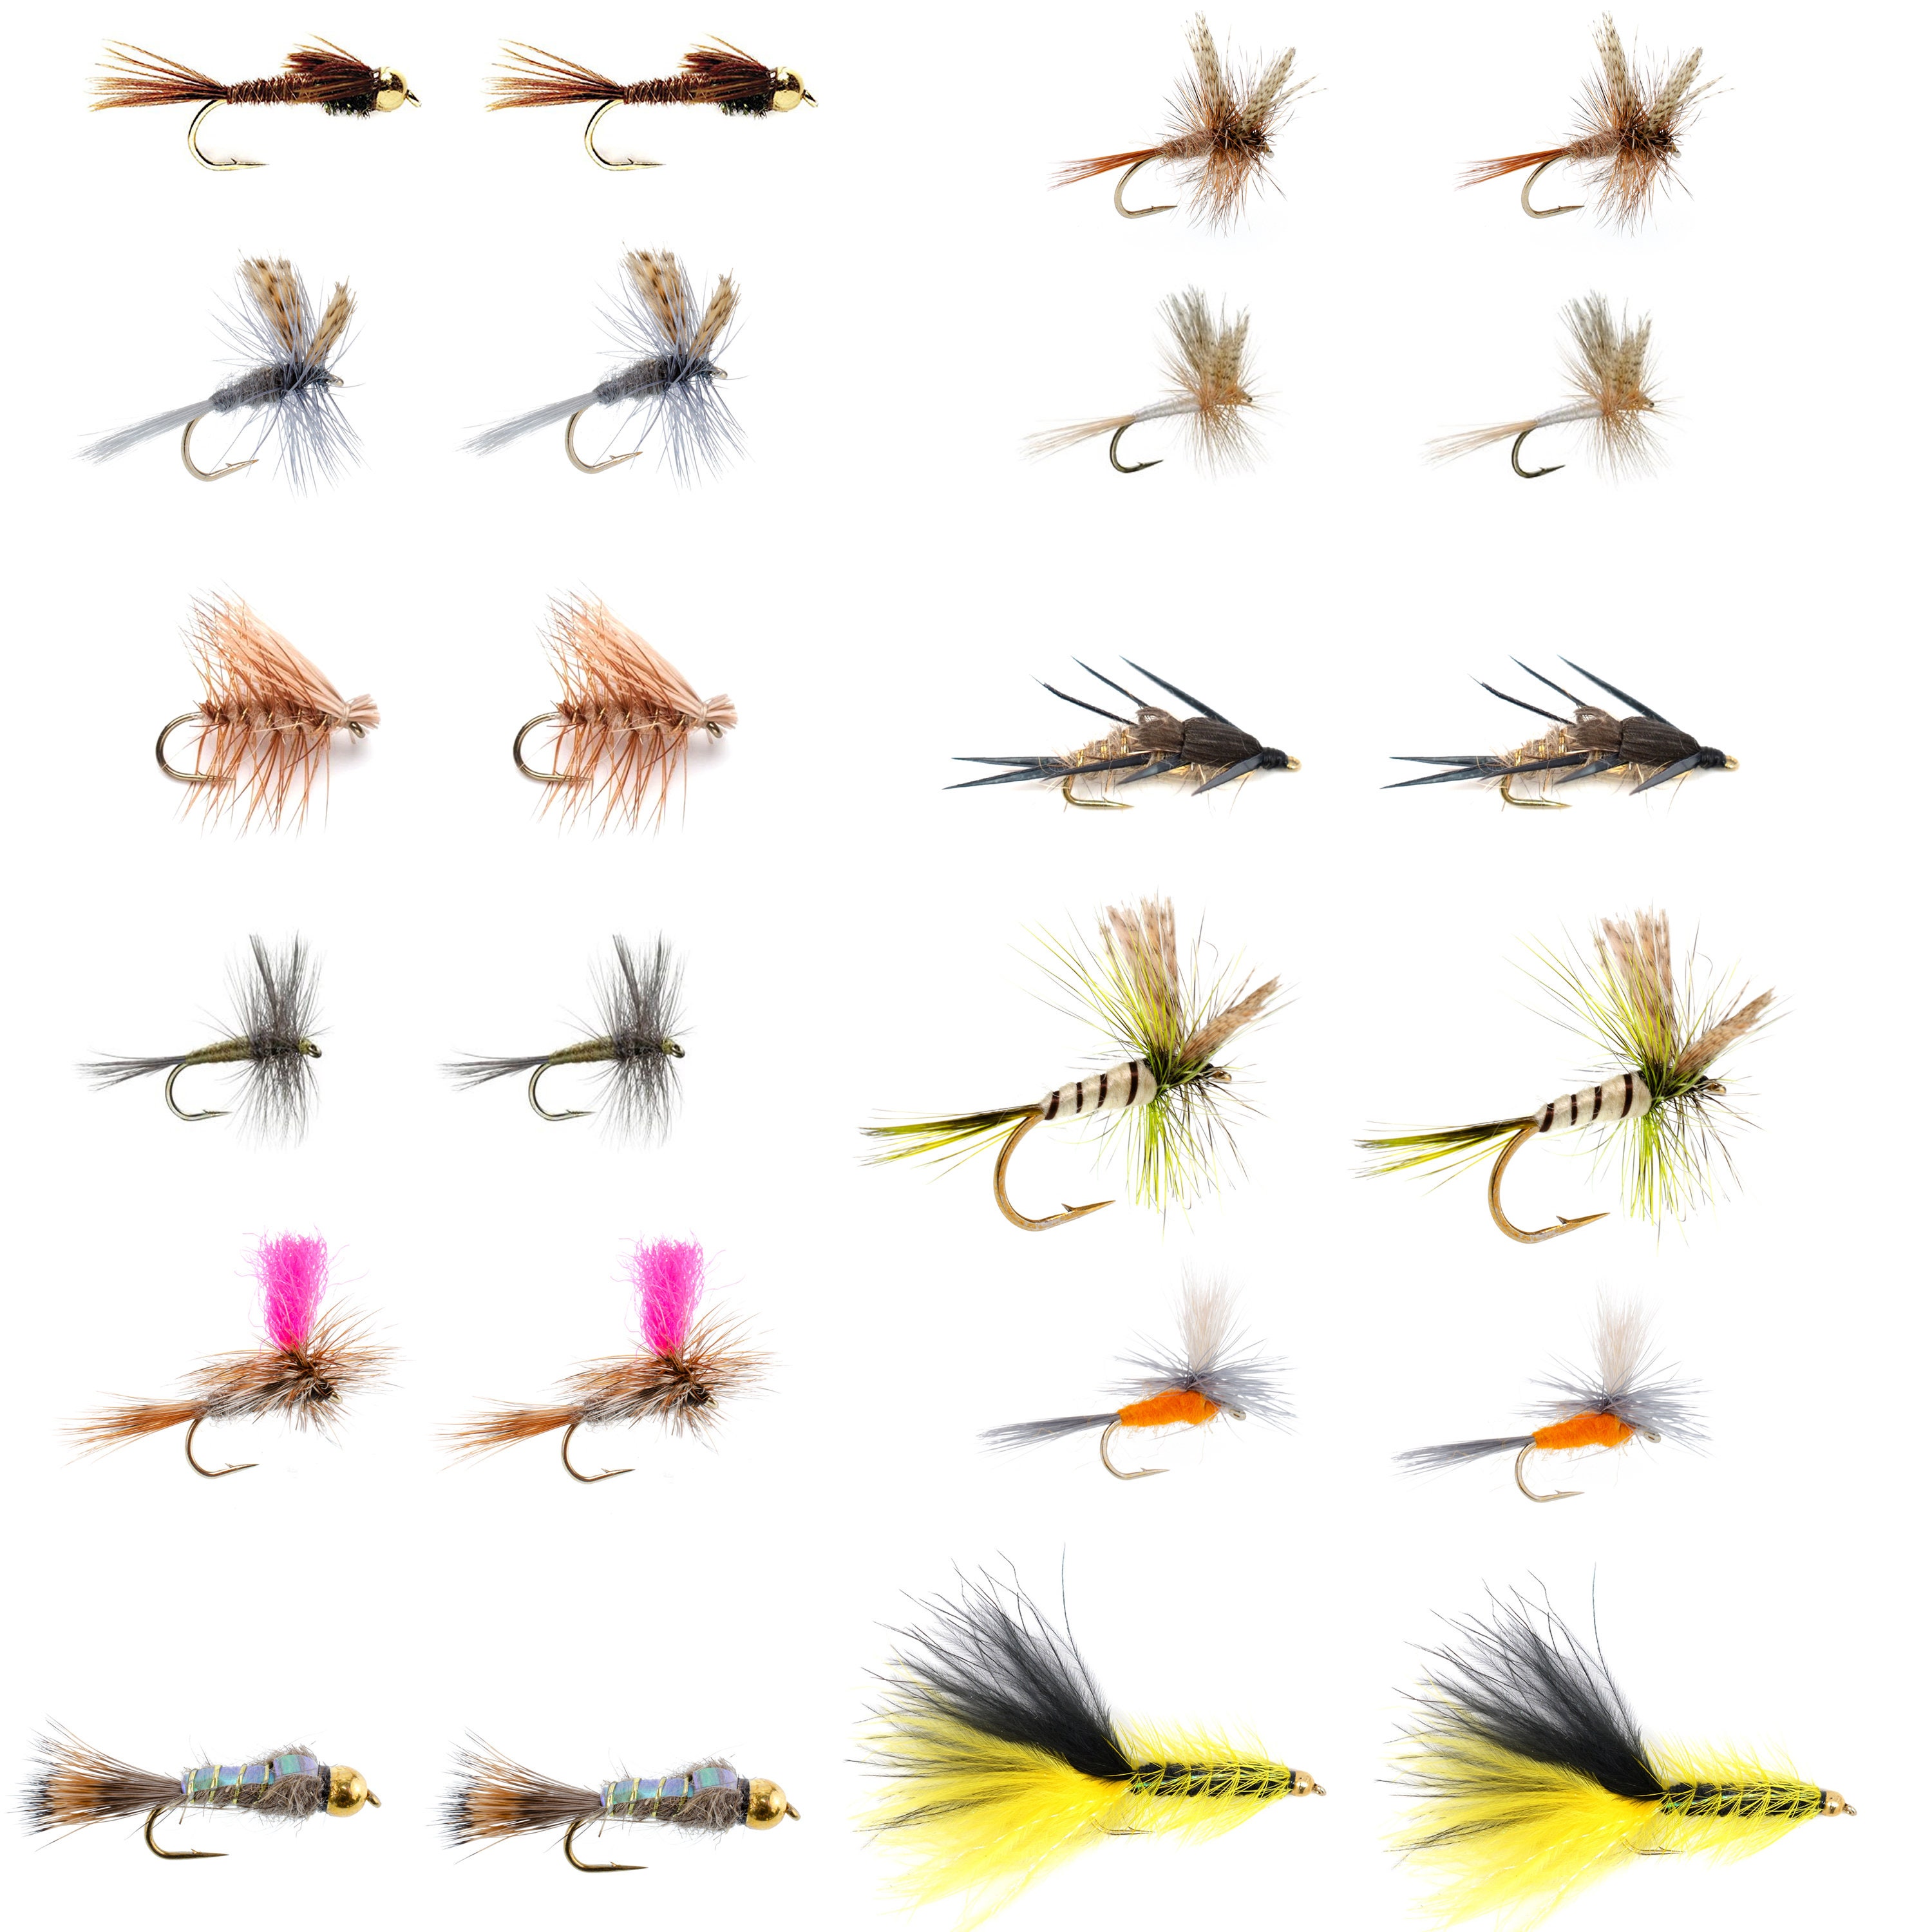 Eastern Trout Fly Assortment 24 Essential Dry and Nymph Fly Fishing Flies  Collection 2 Dozen Trout Flies With Fly Box -  UK